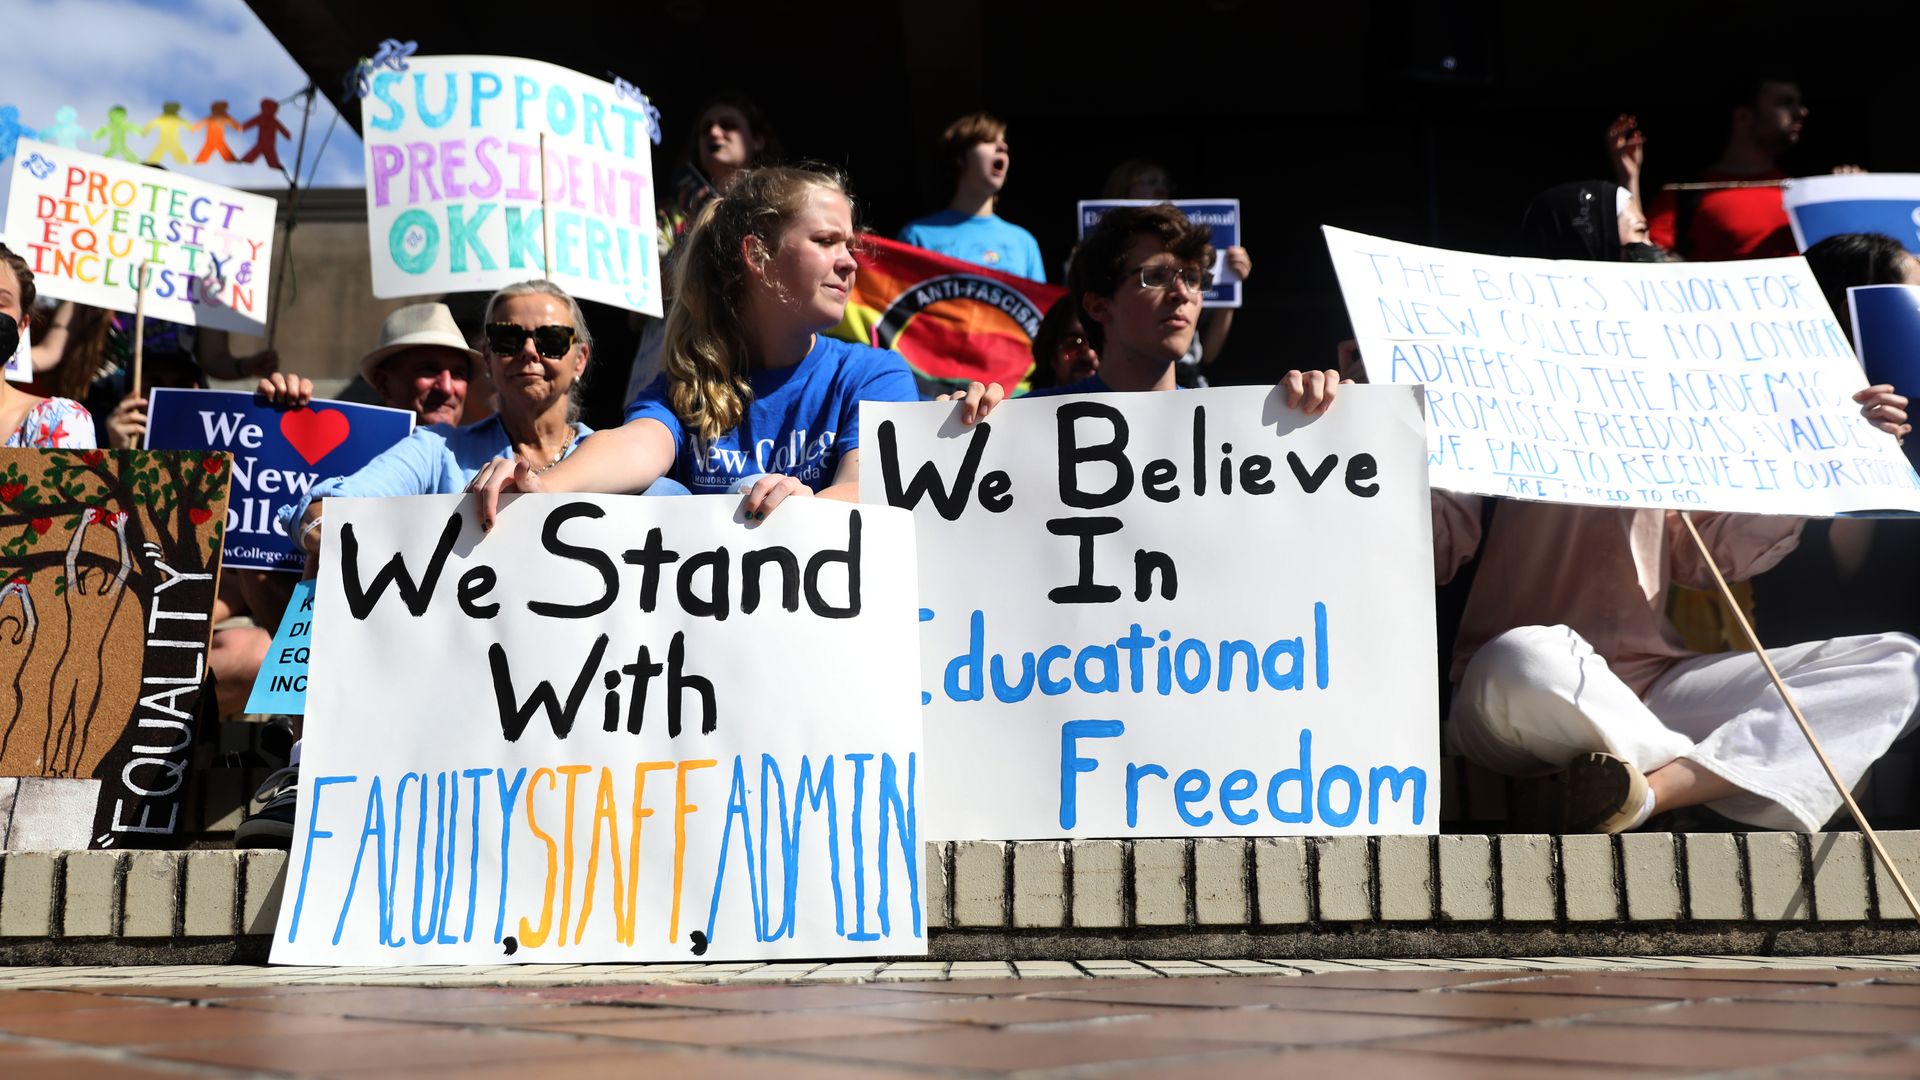 Students during a Defend New College protest in Sarasota, Florida, US, on Tuesday, Jan. 31, 2023. 